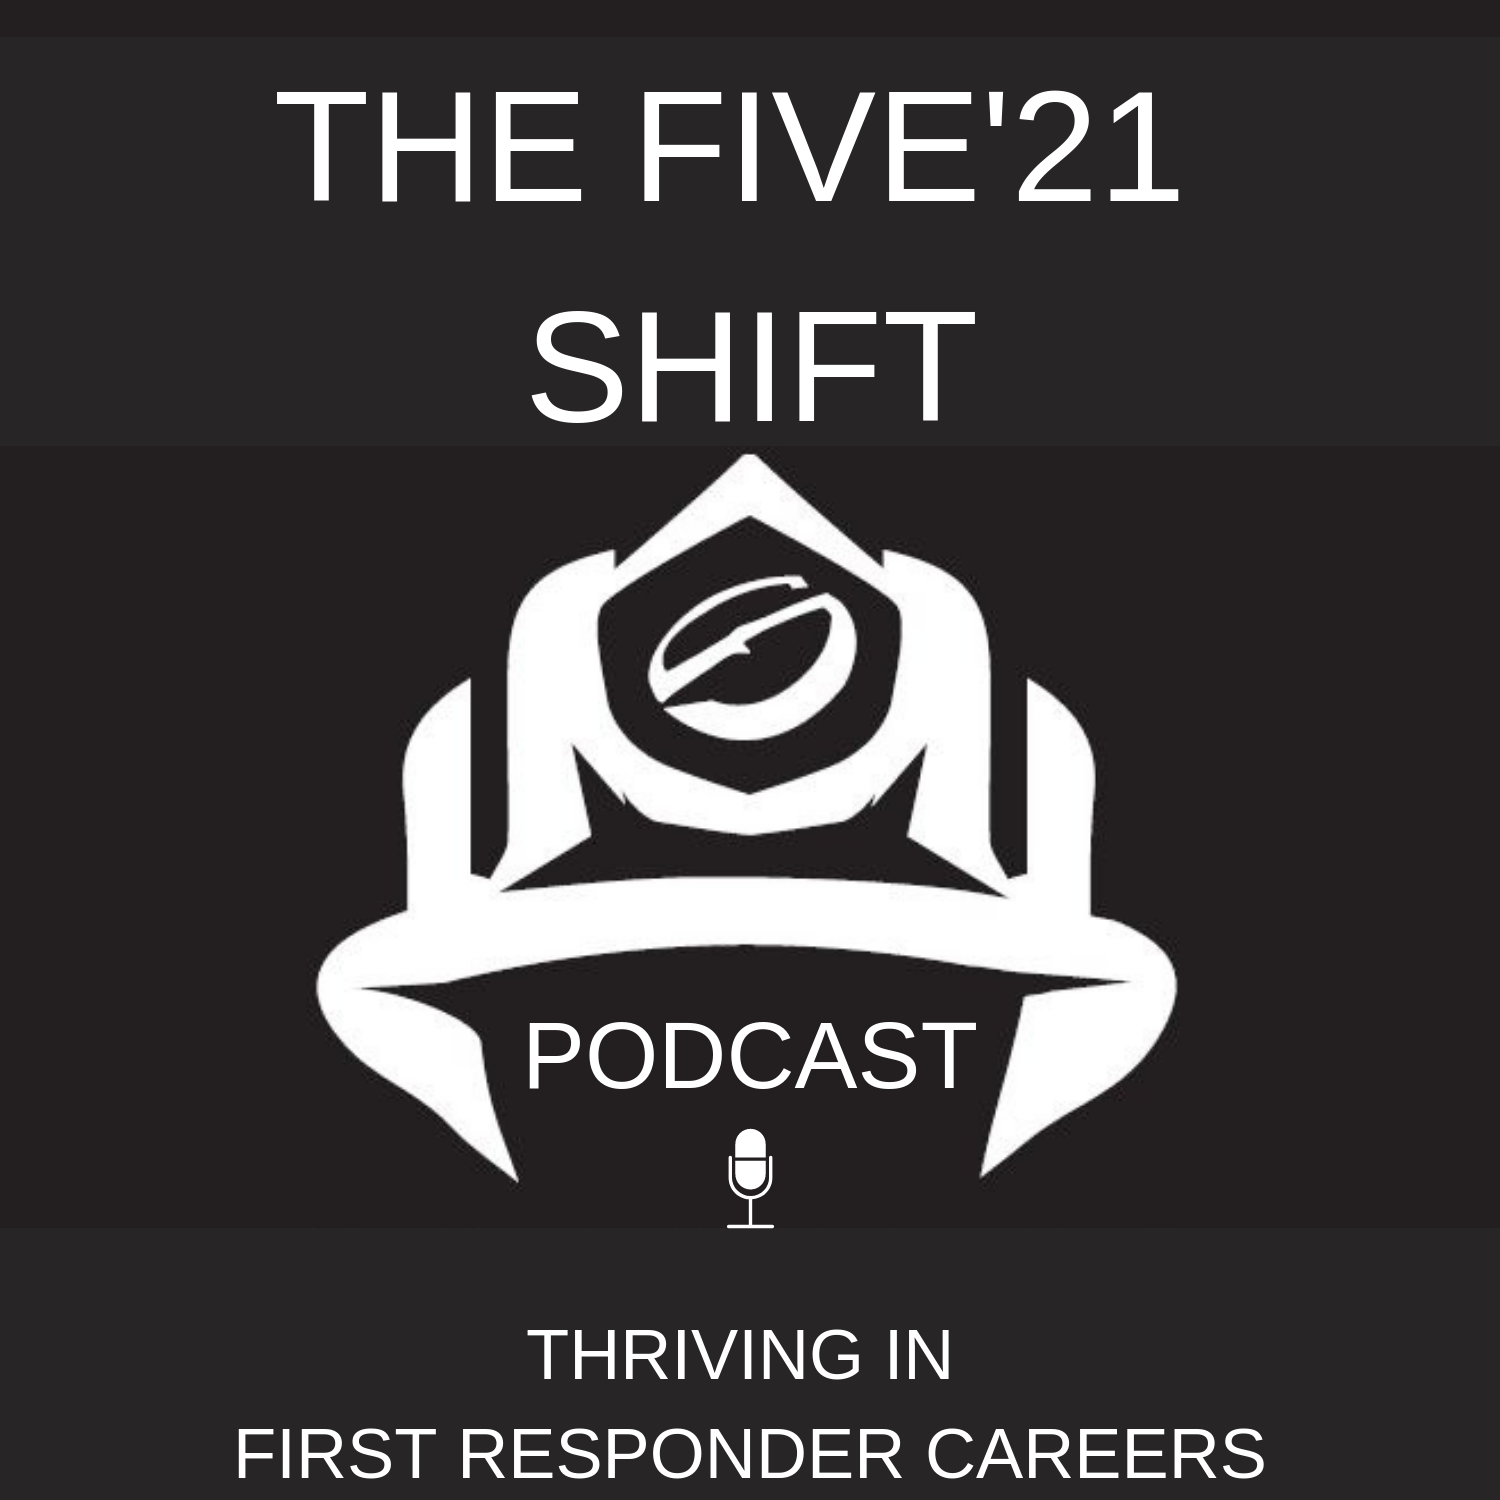 Five'21 Shift Podcast, Episode 002 - What PTSD is like and how we moved forward from the symptoms.